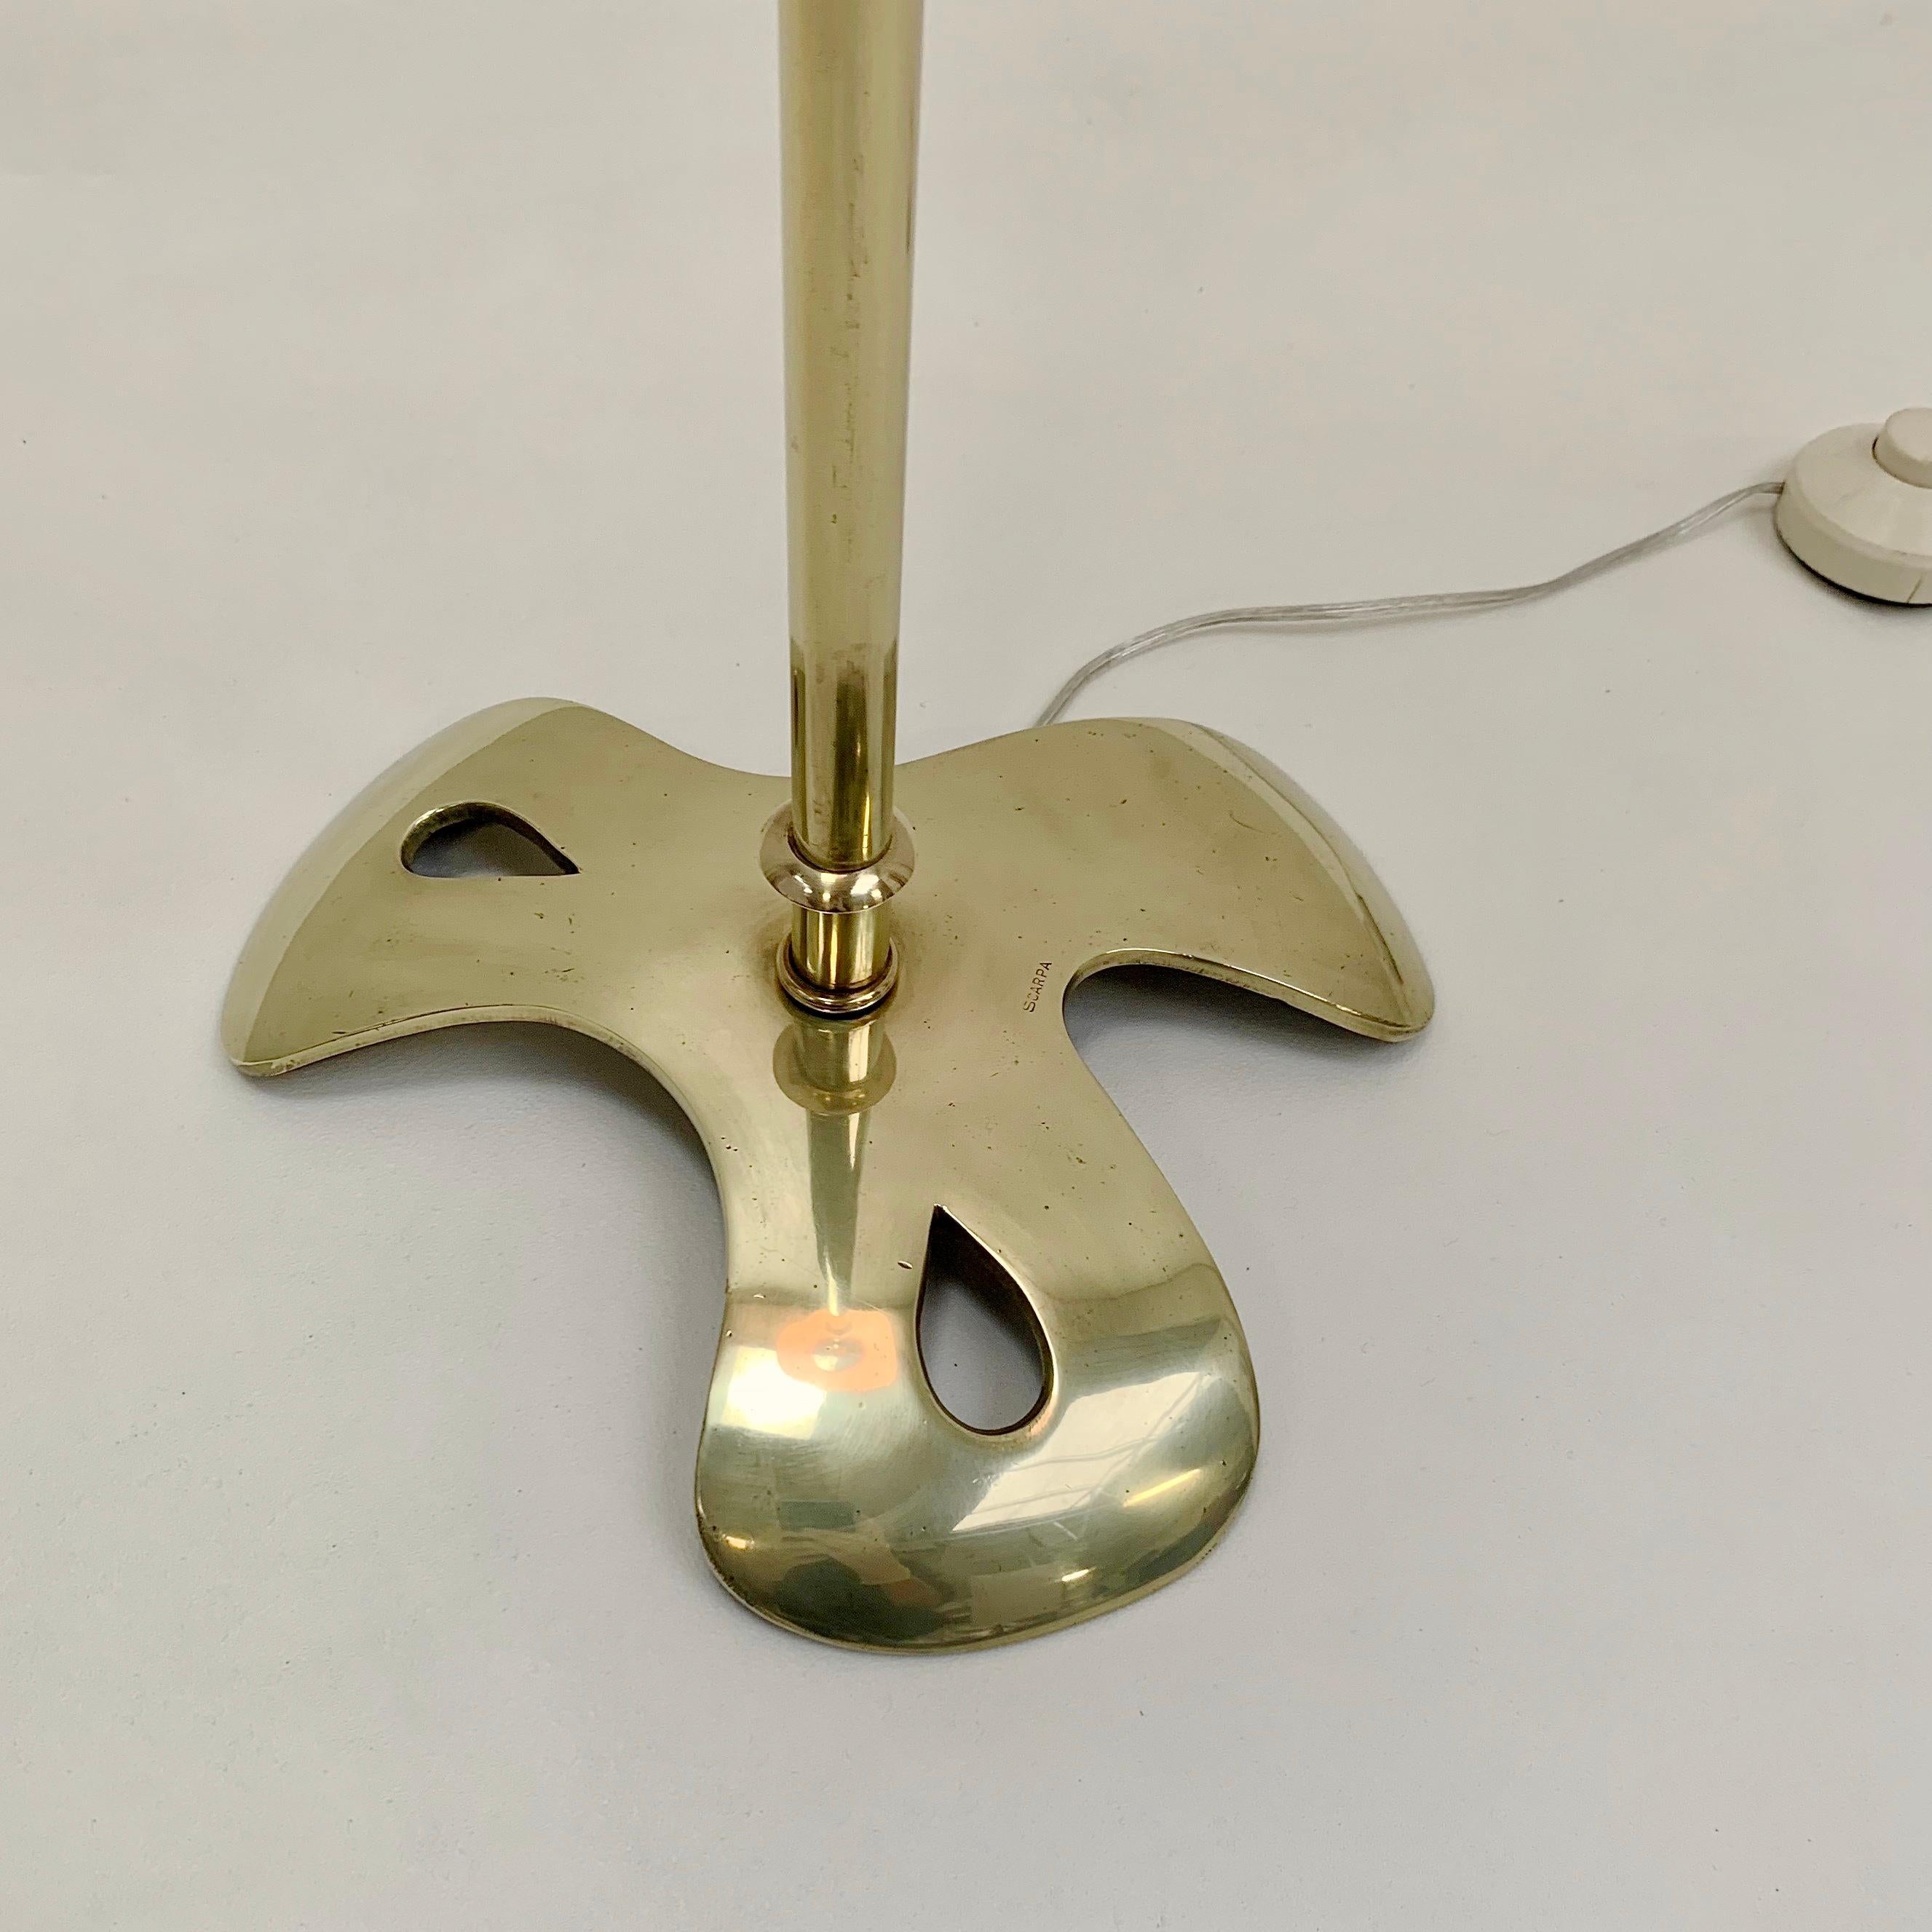 Polished Scarpa Signed Mid-Century Brass Floor Lamp, circa 1960, France. For Sale